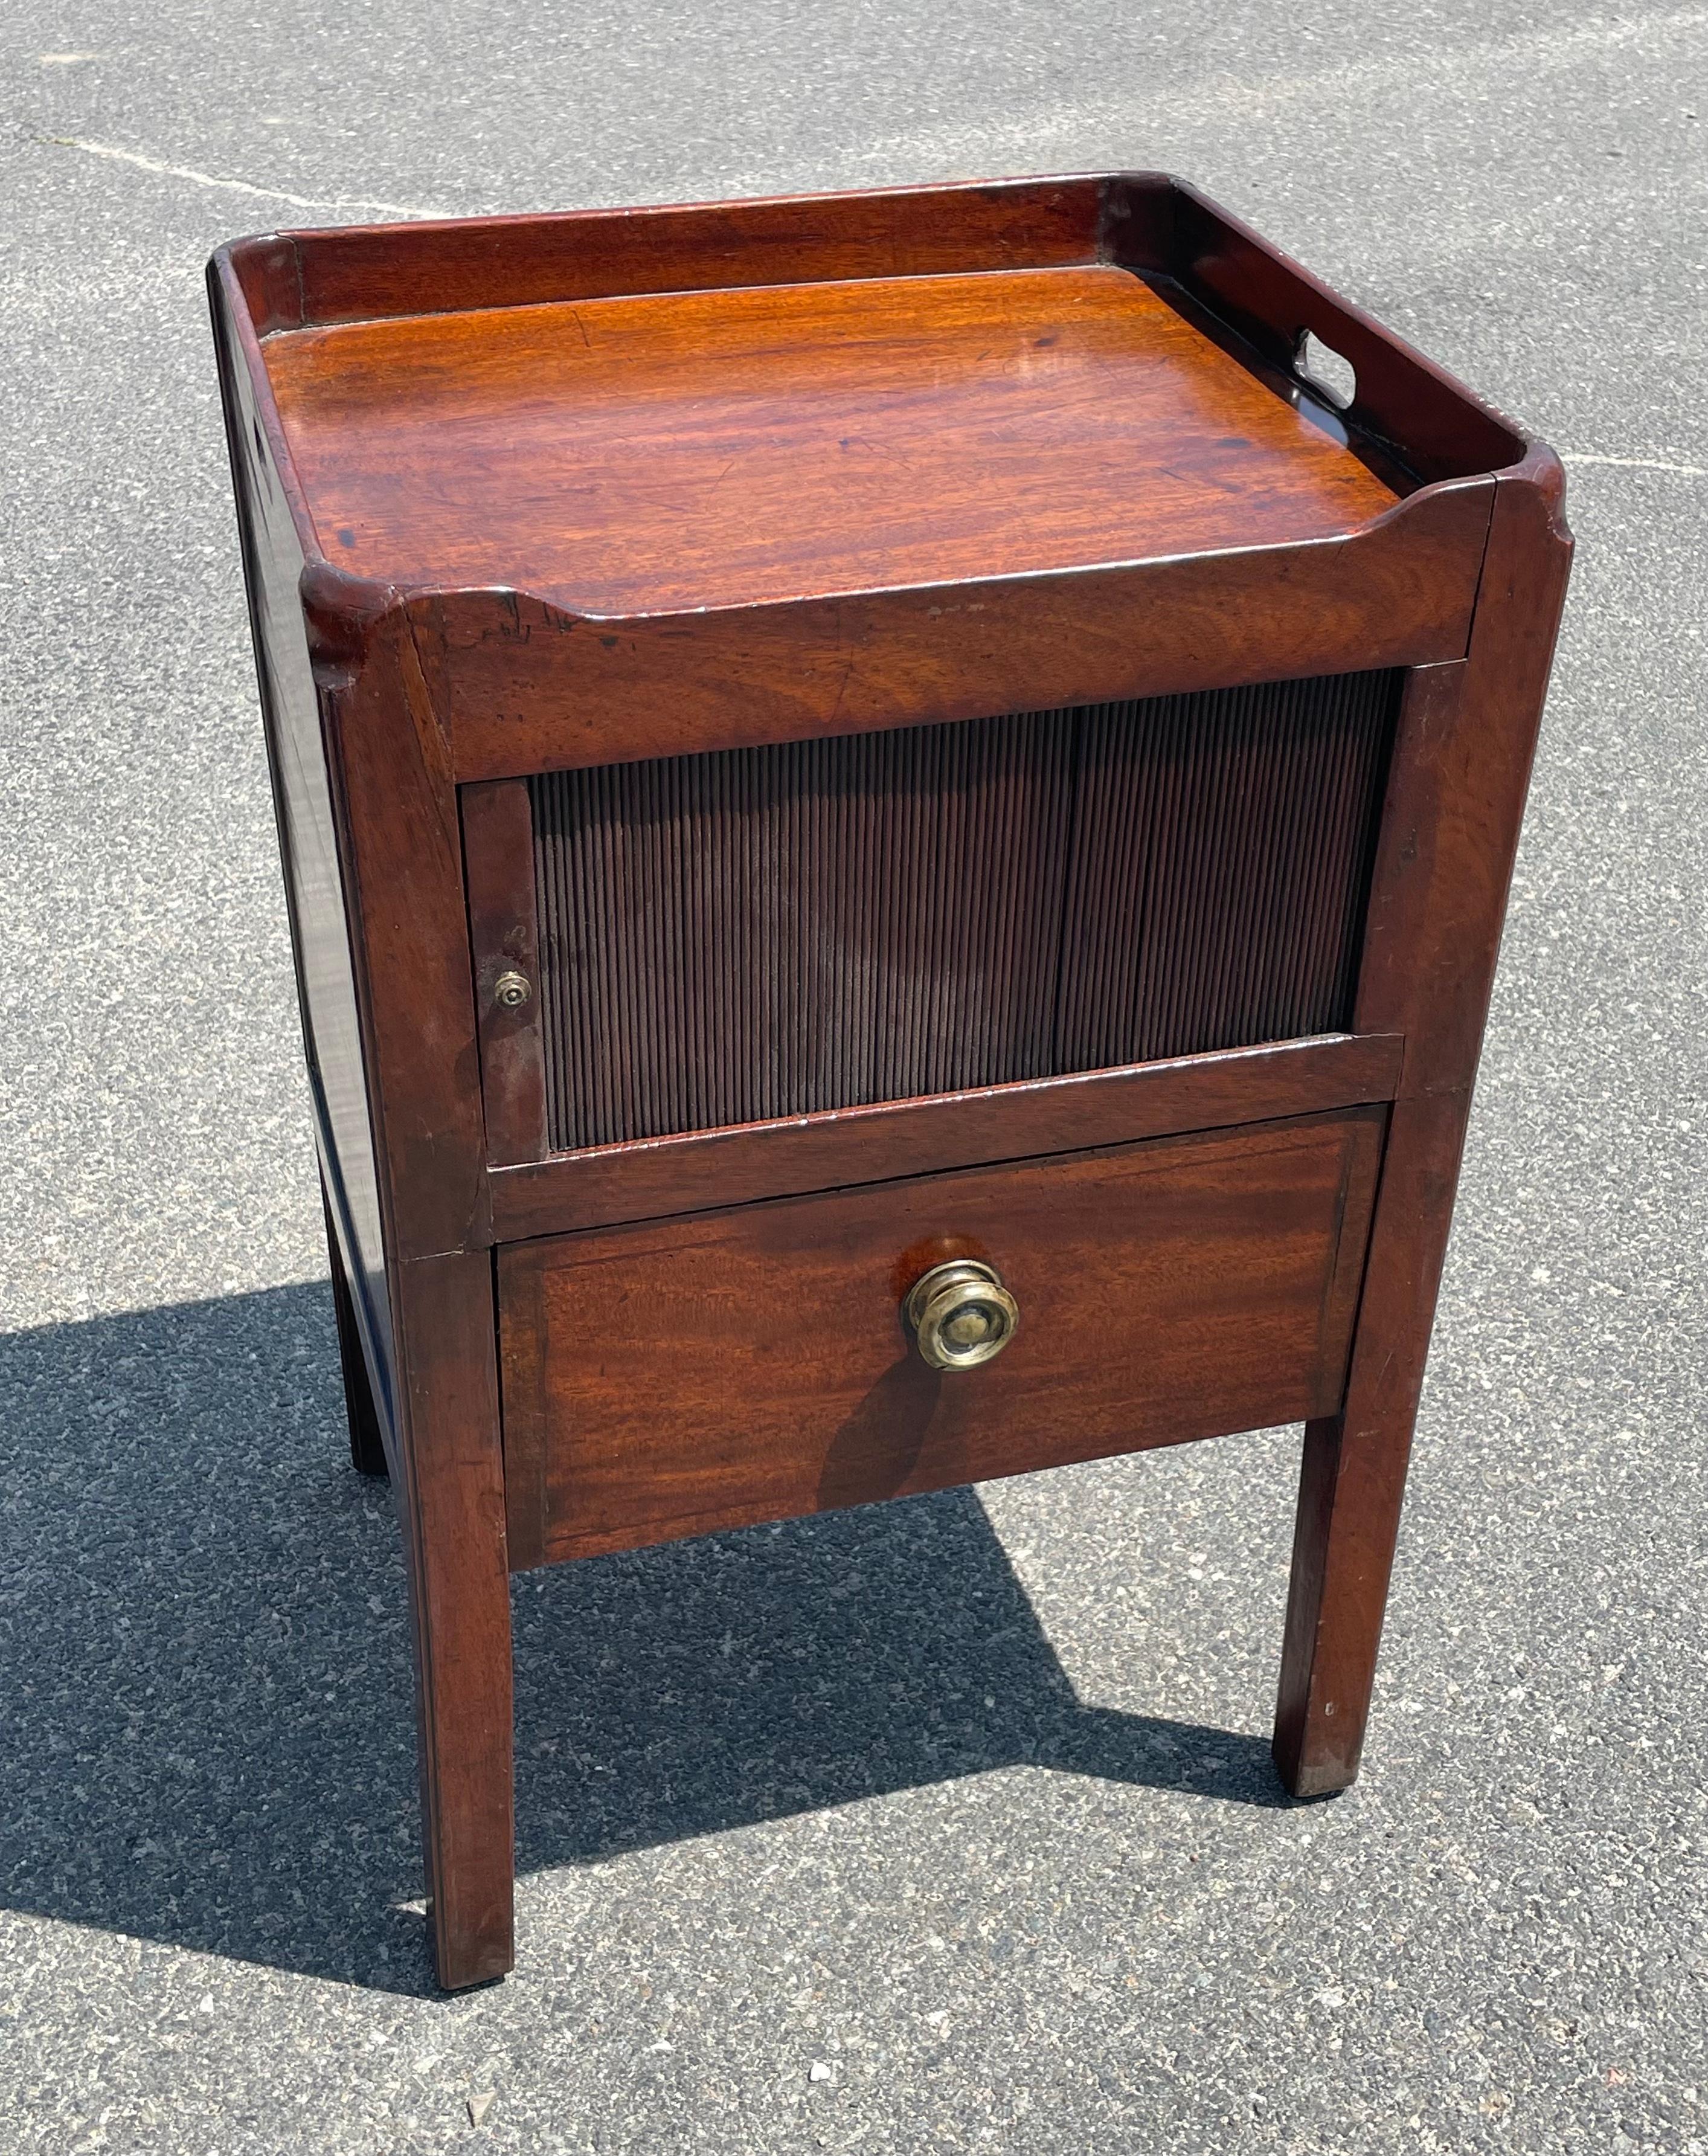 19th century Mahogany sewing stand or work table.  Upper three-sided gallery top with finger cutouts on sides above storage compartment with accordion style sliding door, with single drawer below.  Brass knobs.  Surface height 28.5 inches.